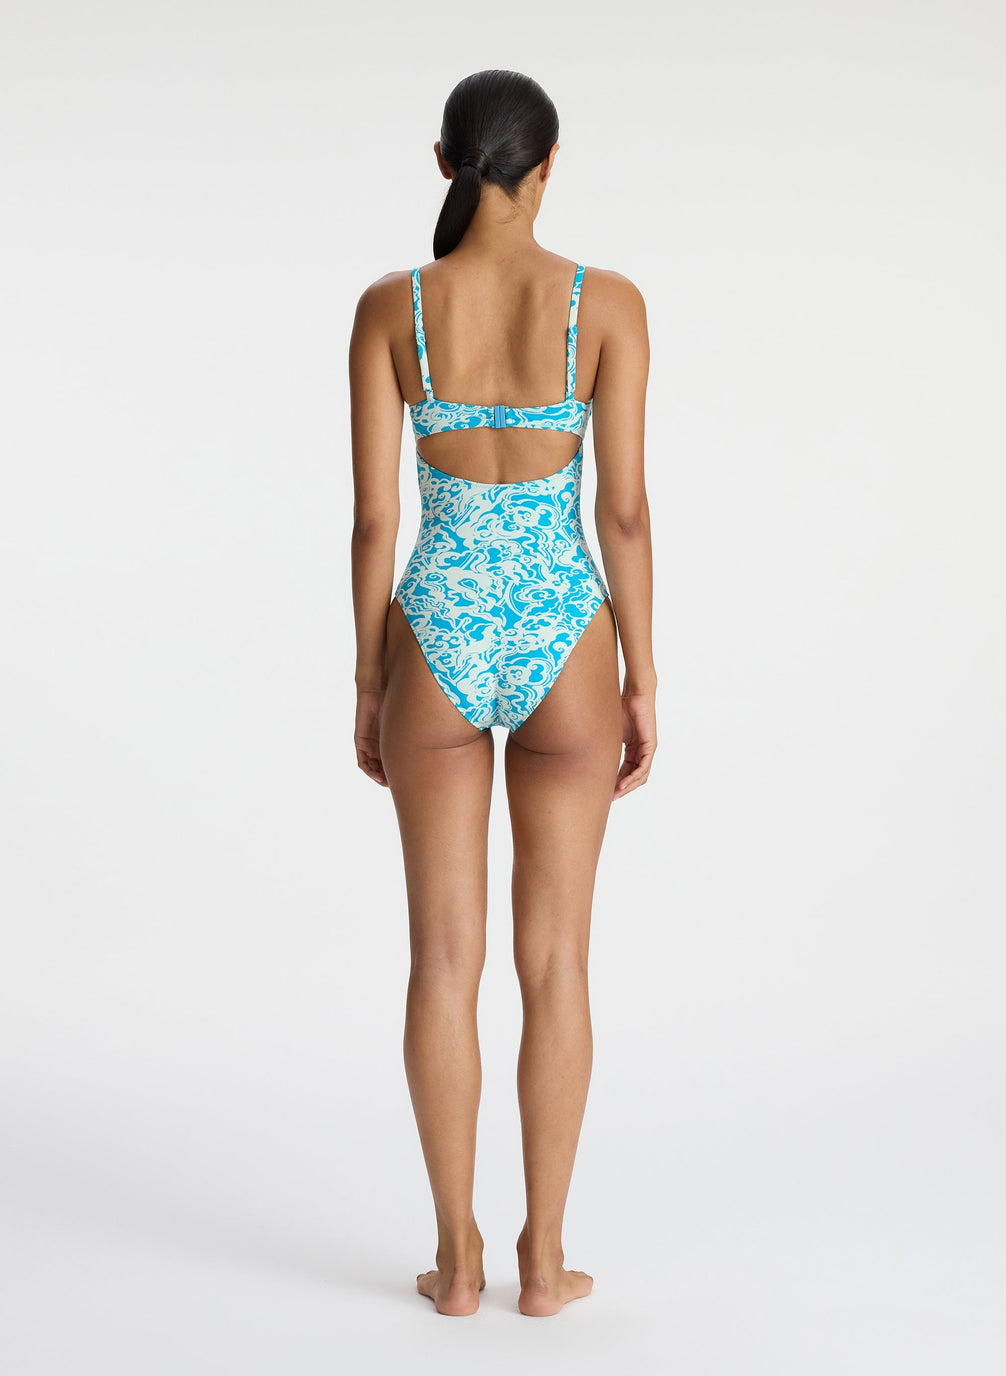 back view of woman wearing aqua print one piece swimsuit